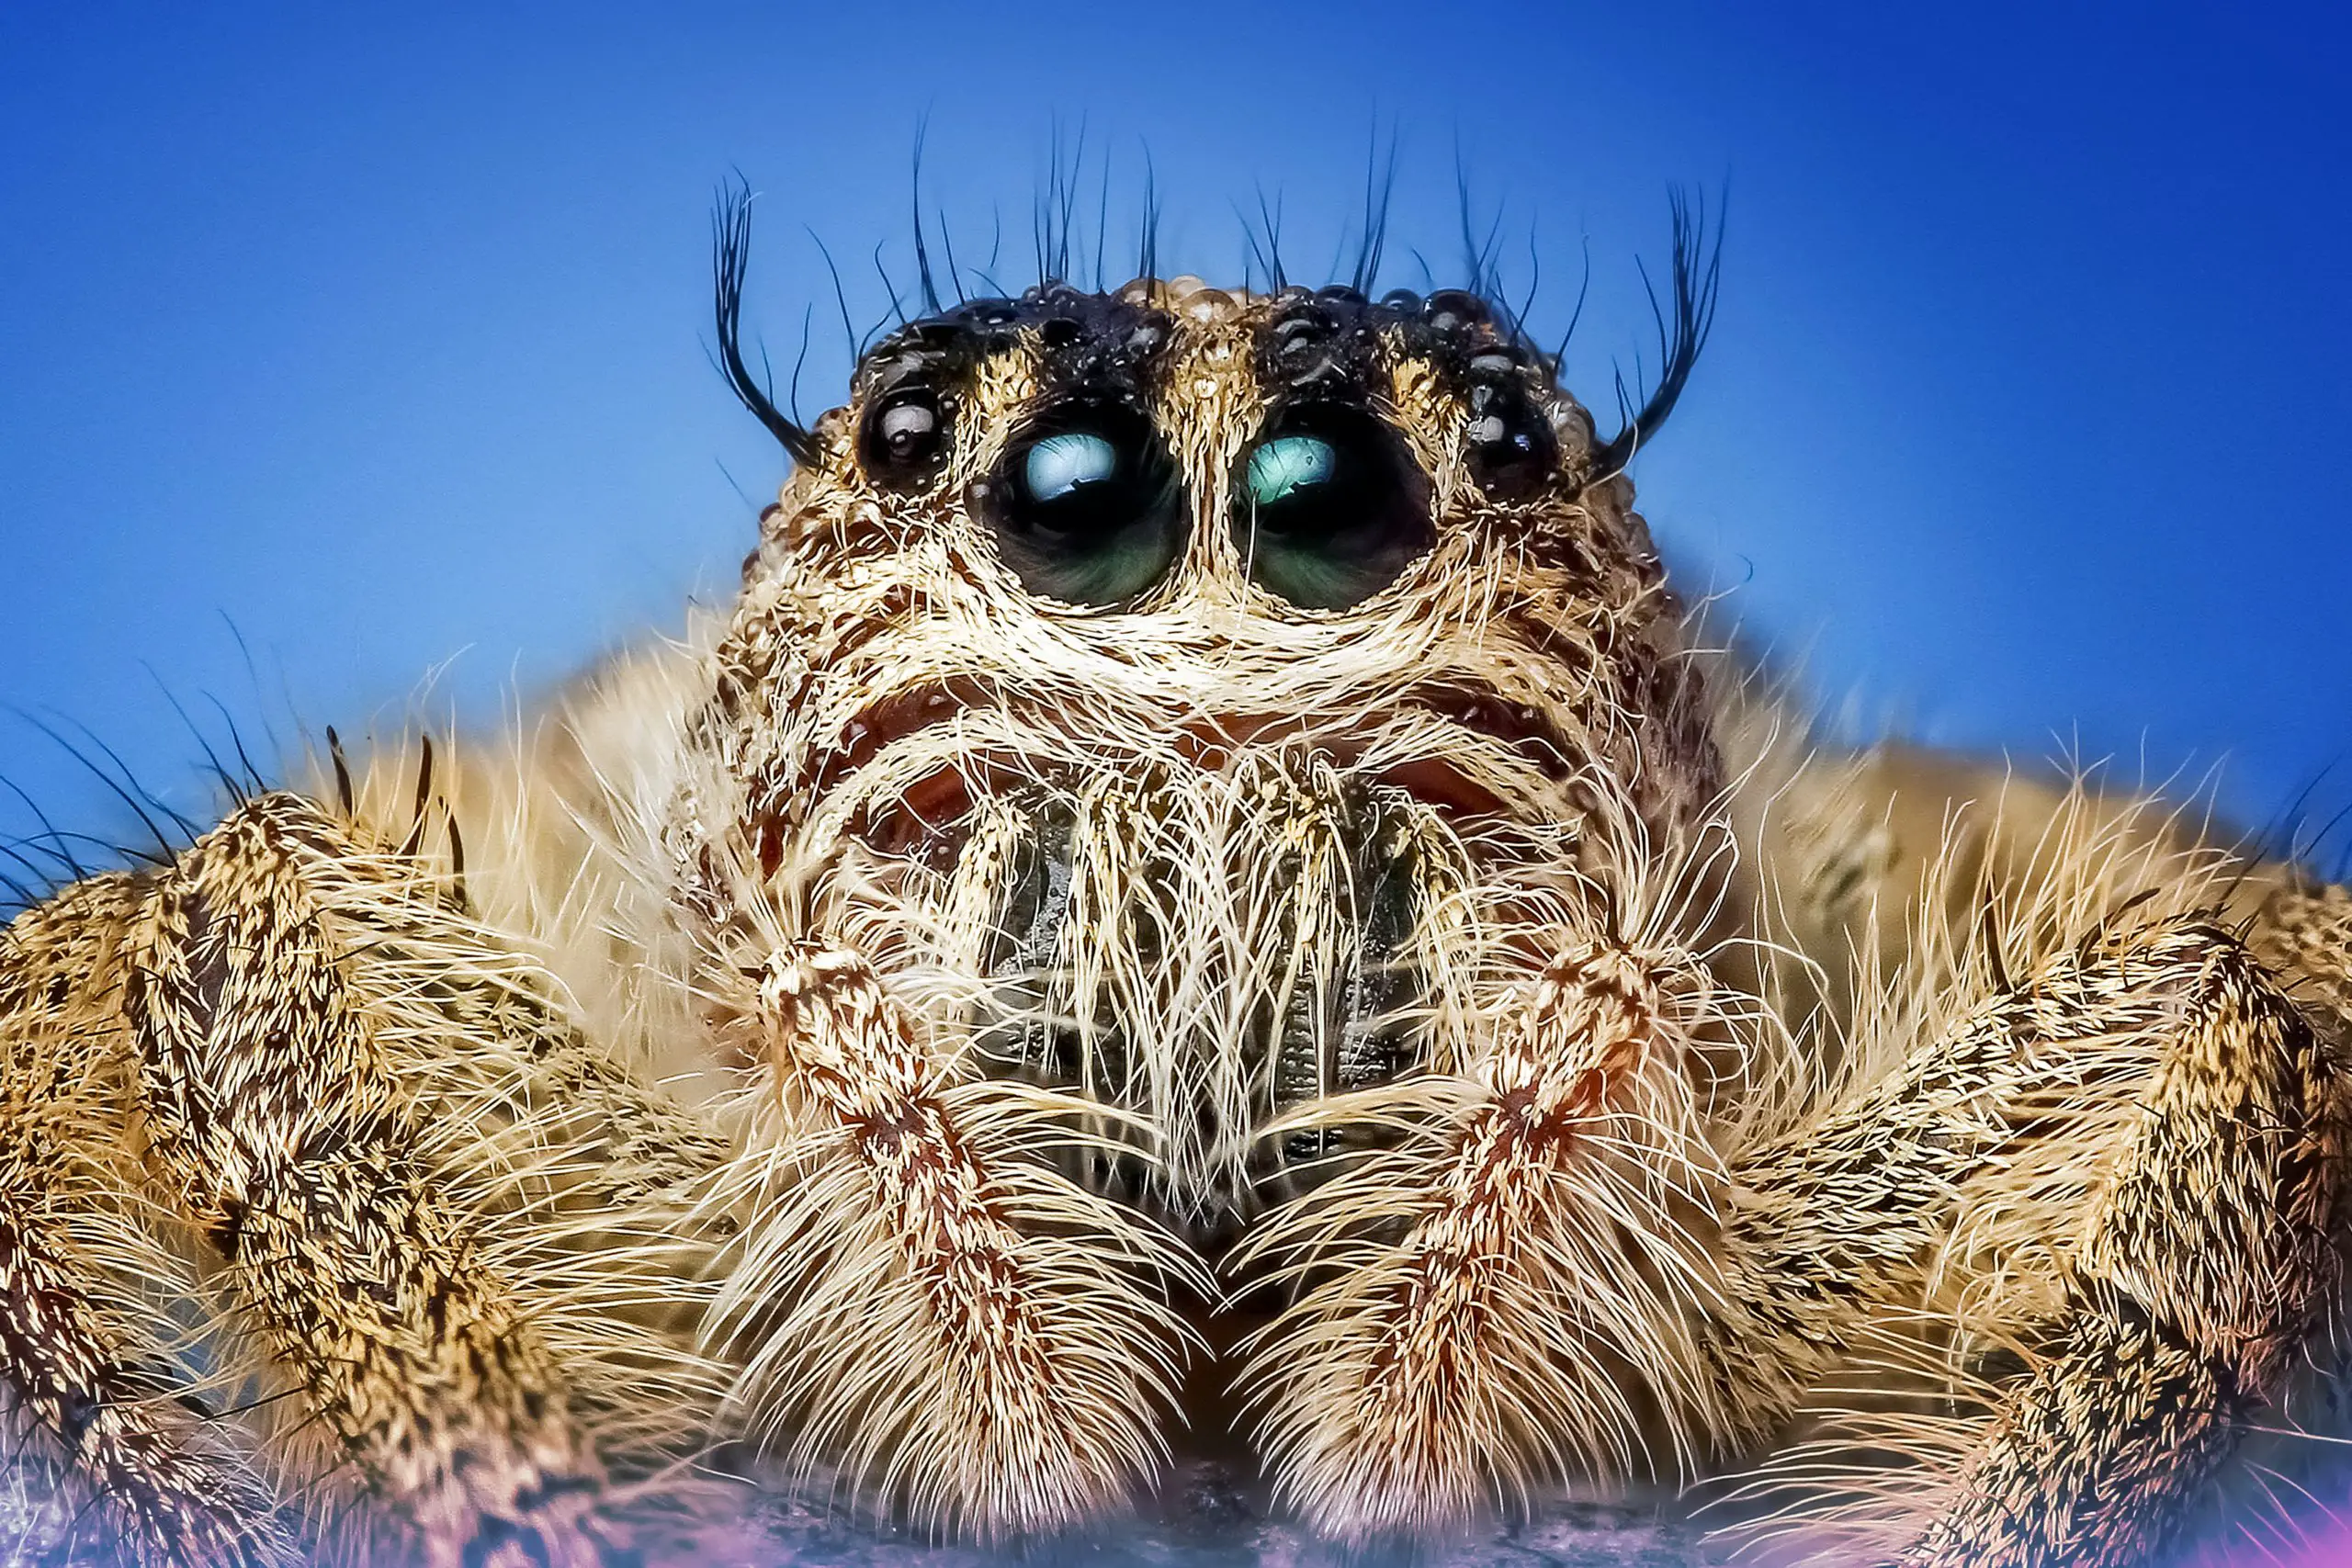 Eye pattern of a jumping spider (jumping spider eyes)